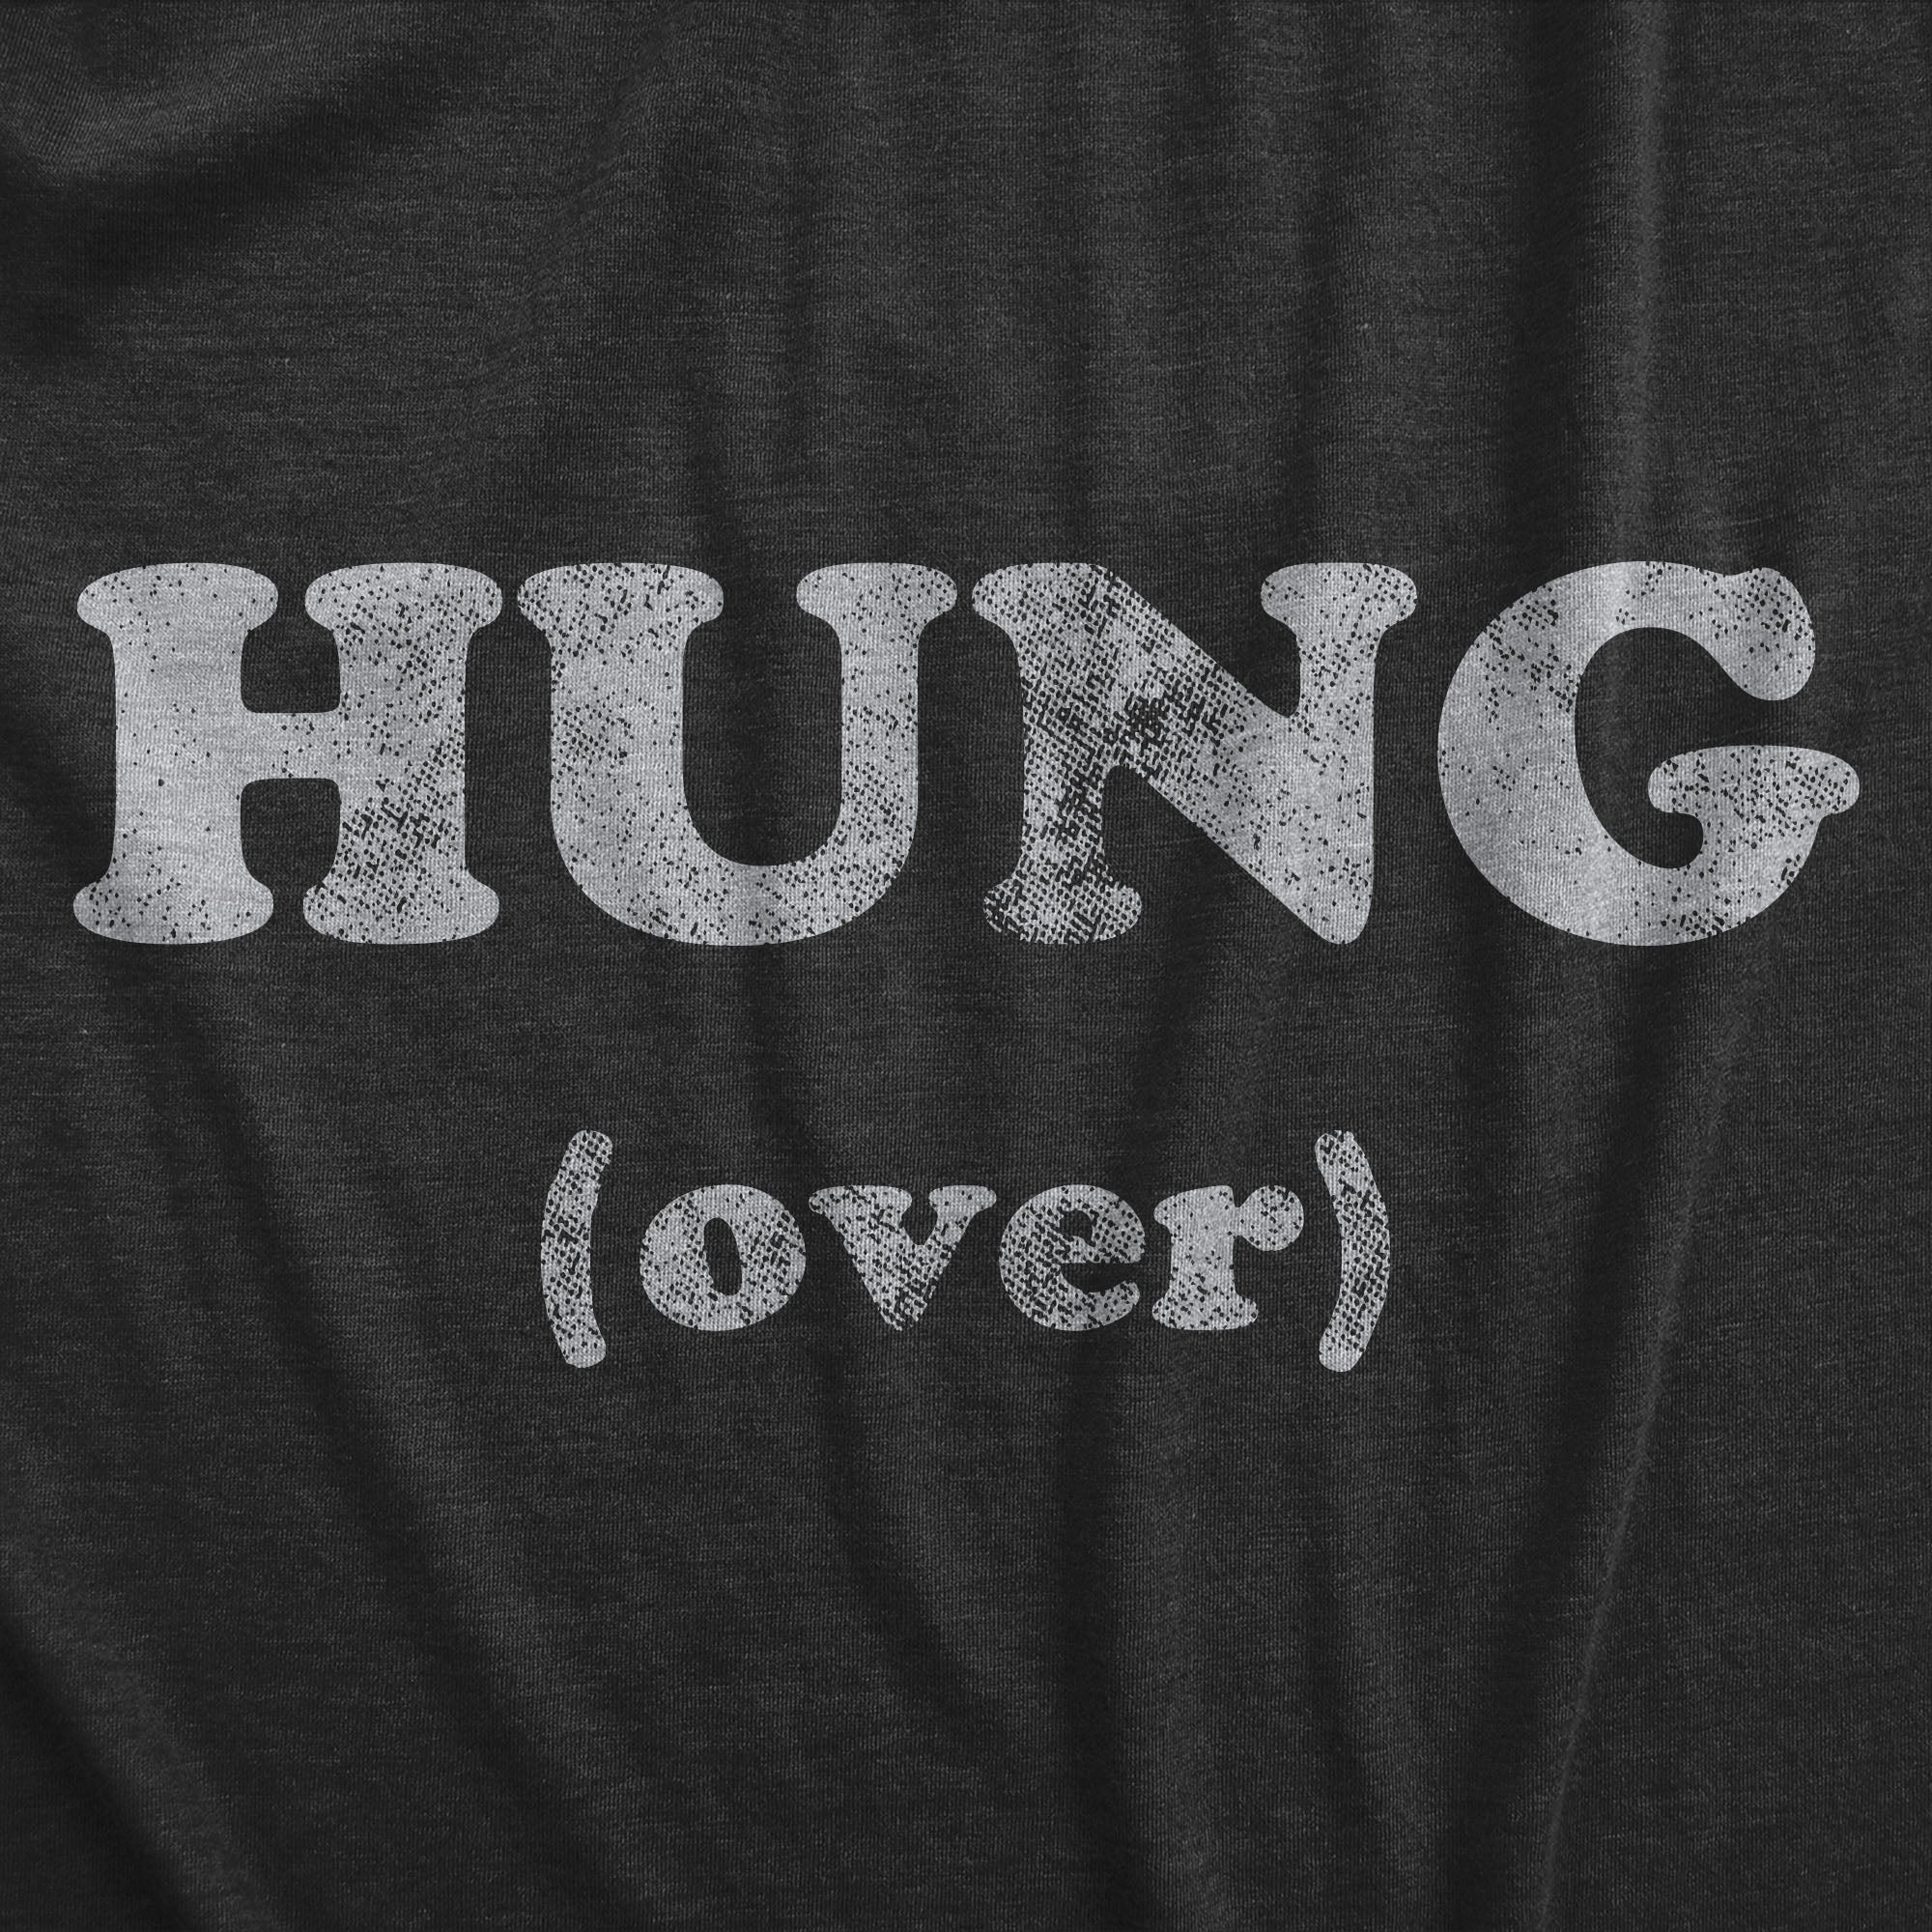 Funny Heather Black - HUNG Hung Over Mens T Shirt Nerdy sex Drinking Tee